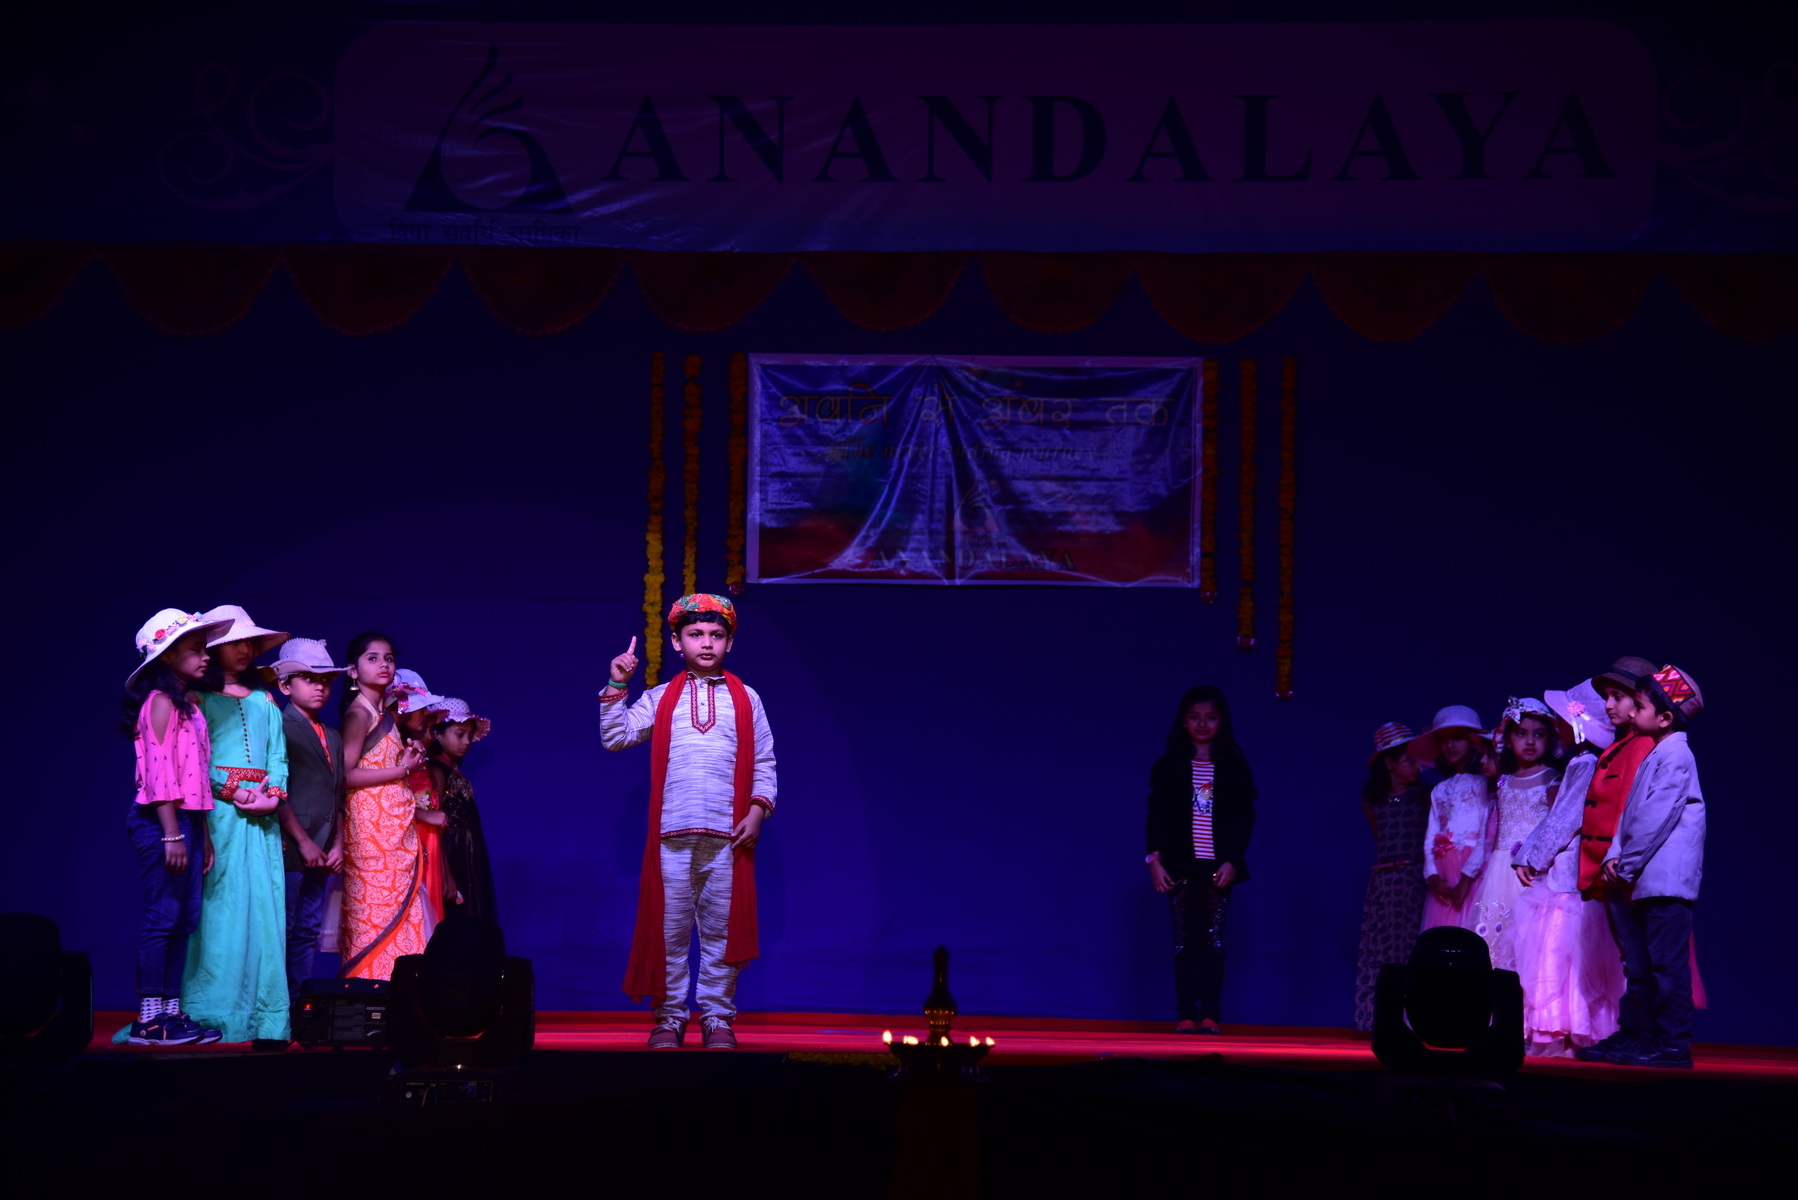 Annual Day - 1